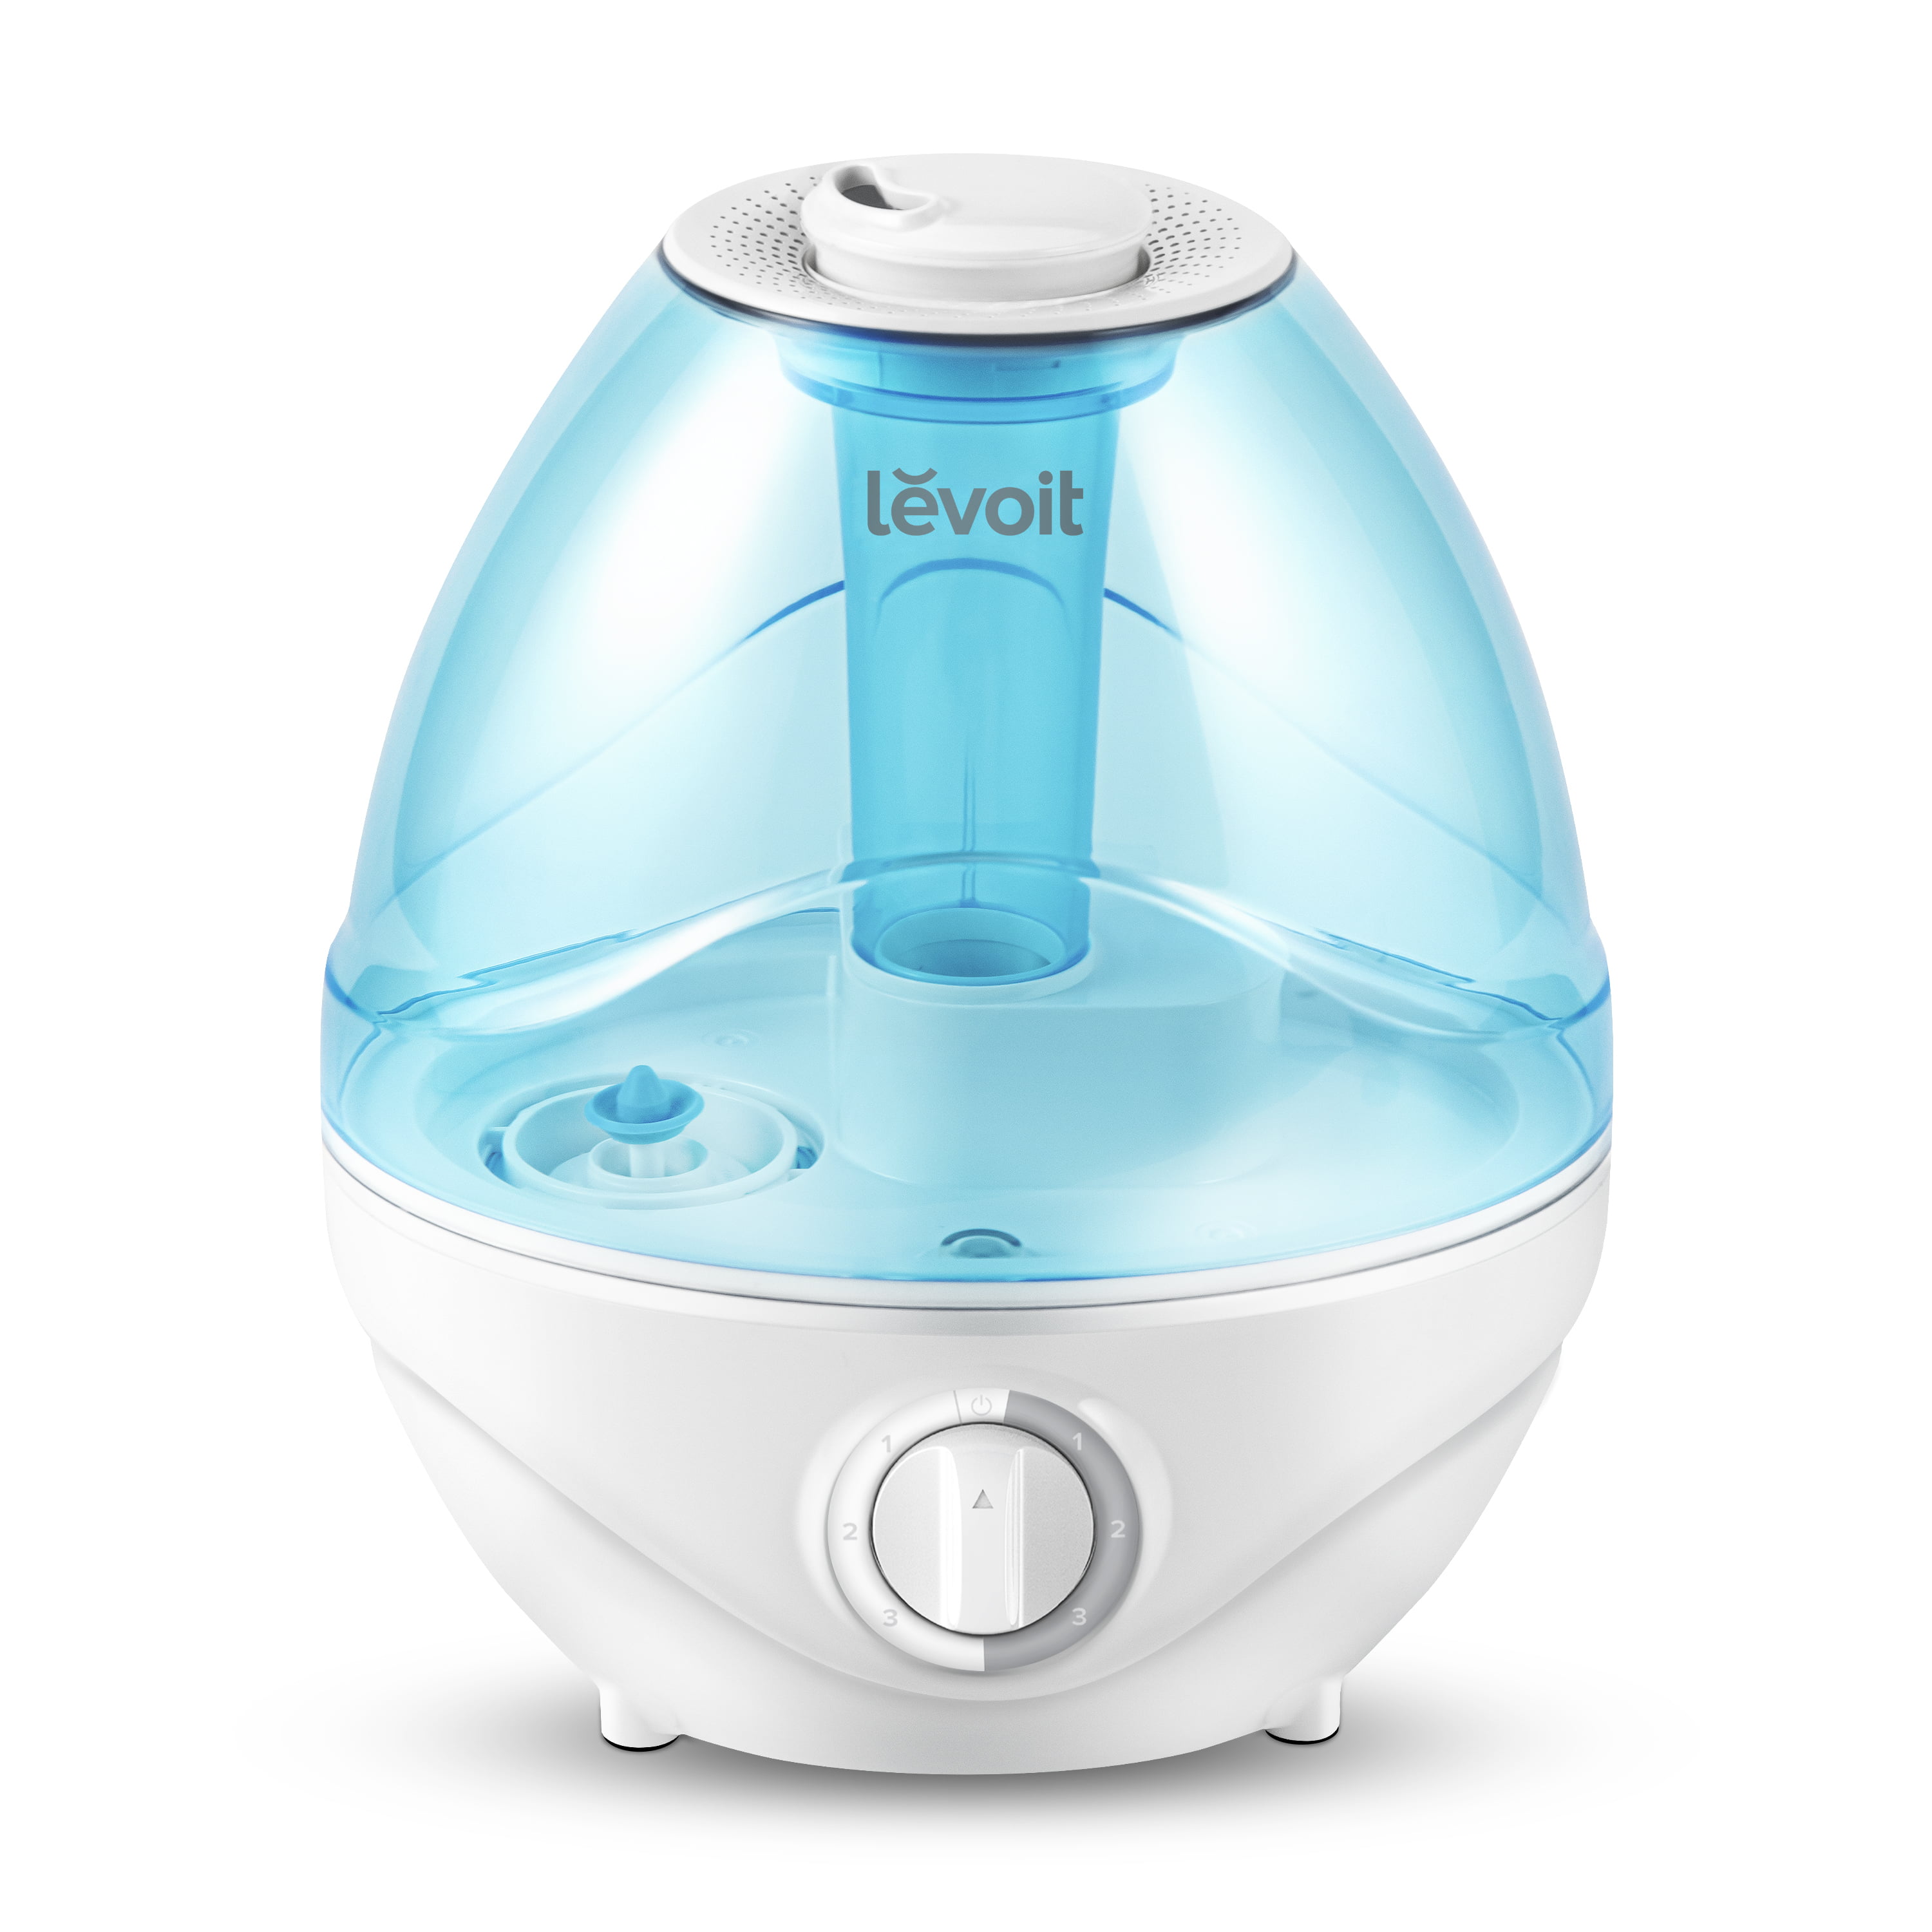 3.6L Cool Mist Humidifier for Office 